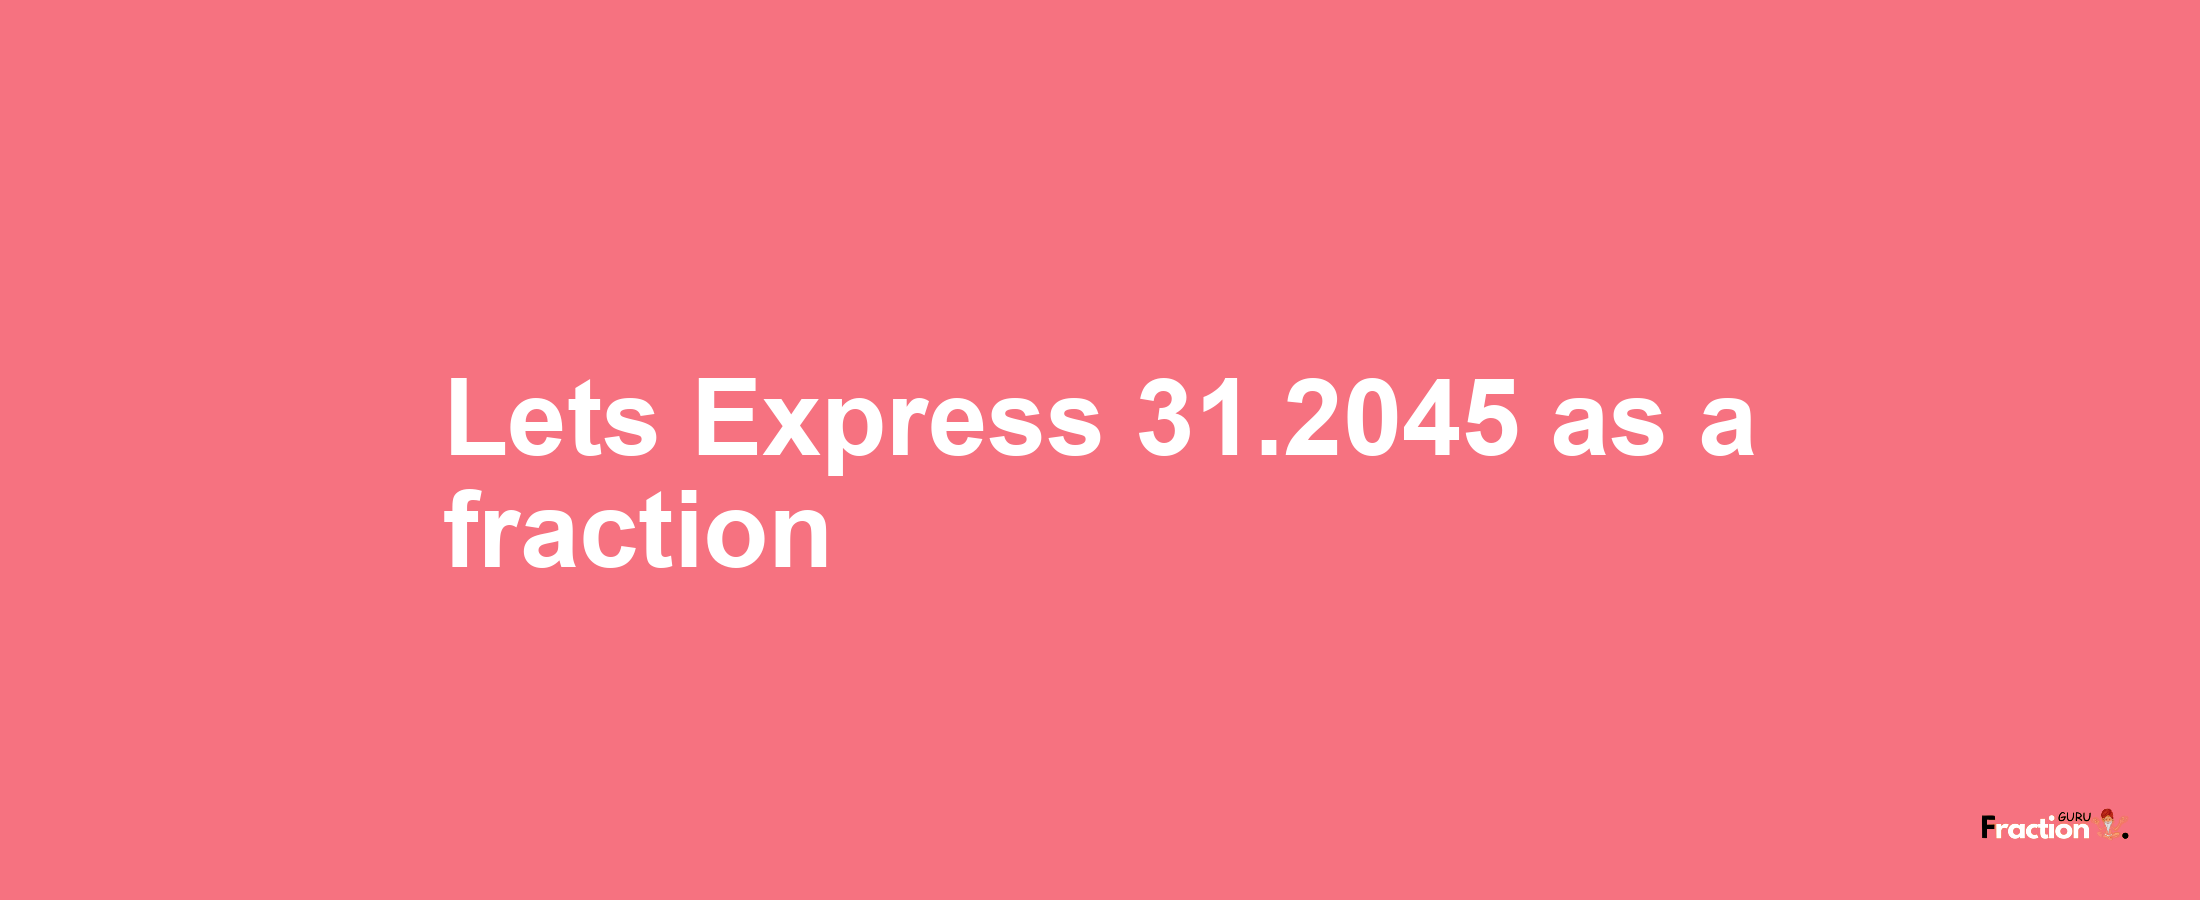 Lets Express 31.2045 as afraction